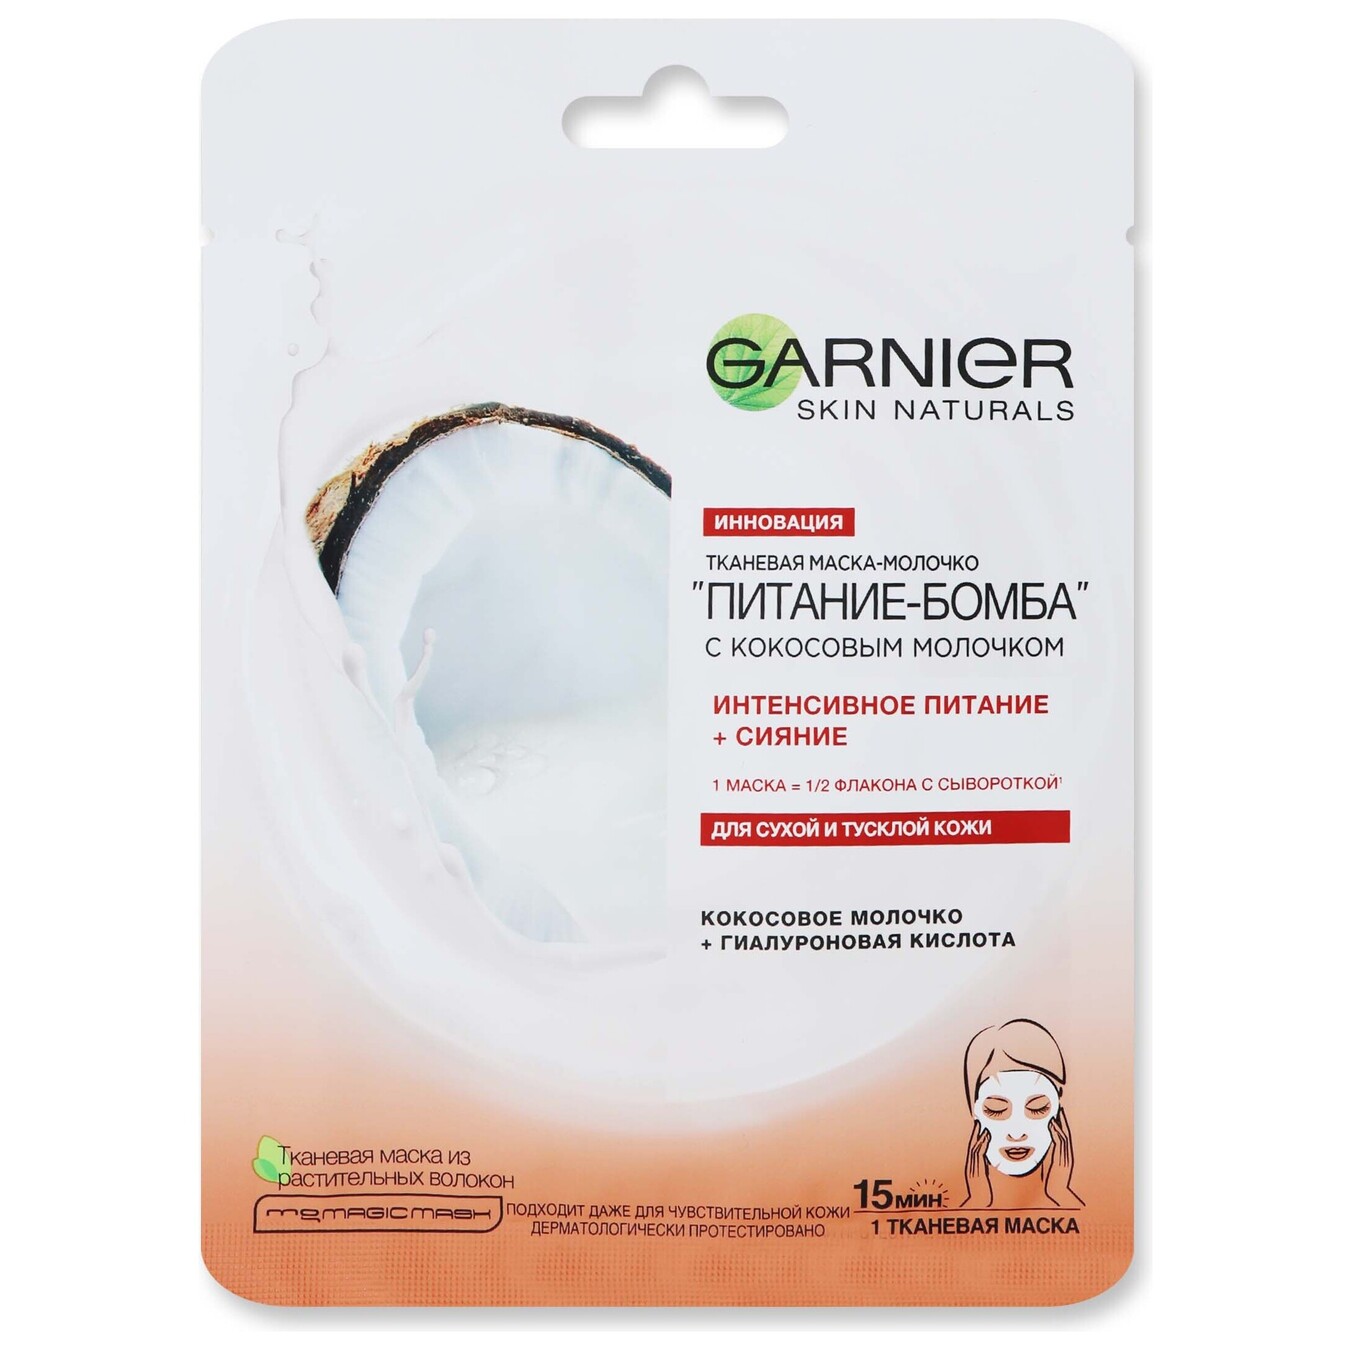 Fabric mask Garnier Nourishment-Bomb Skin Naturals with coconut milk for dry and dull facial skin 28 g